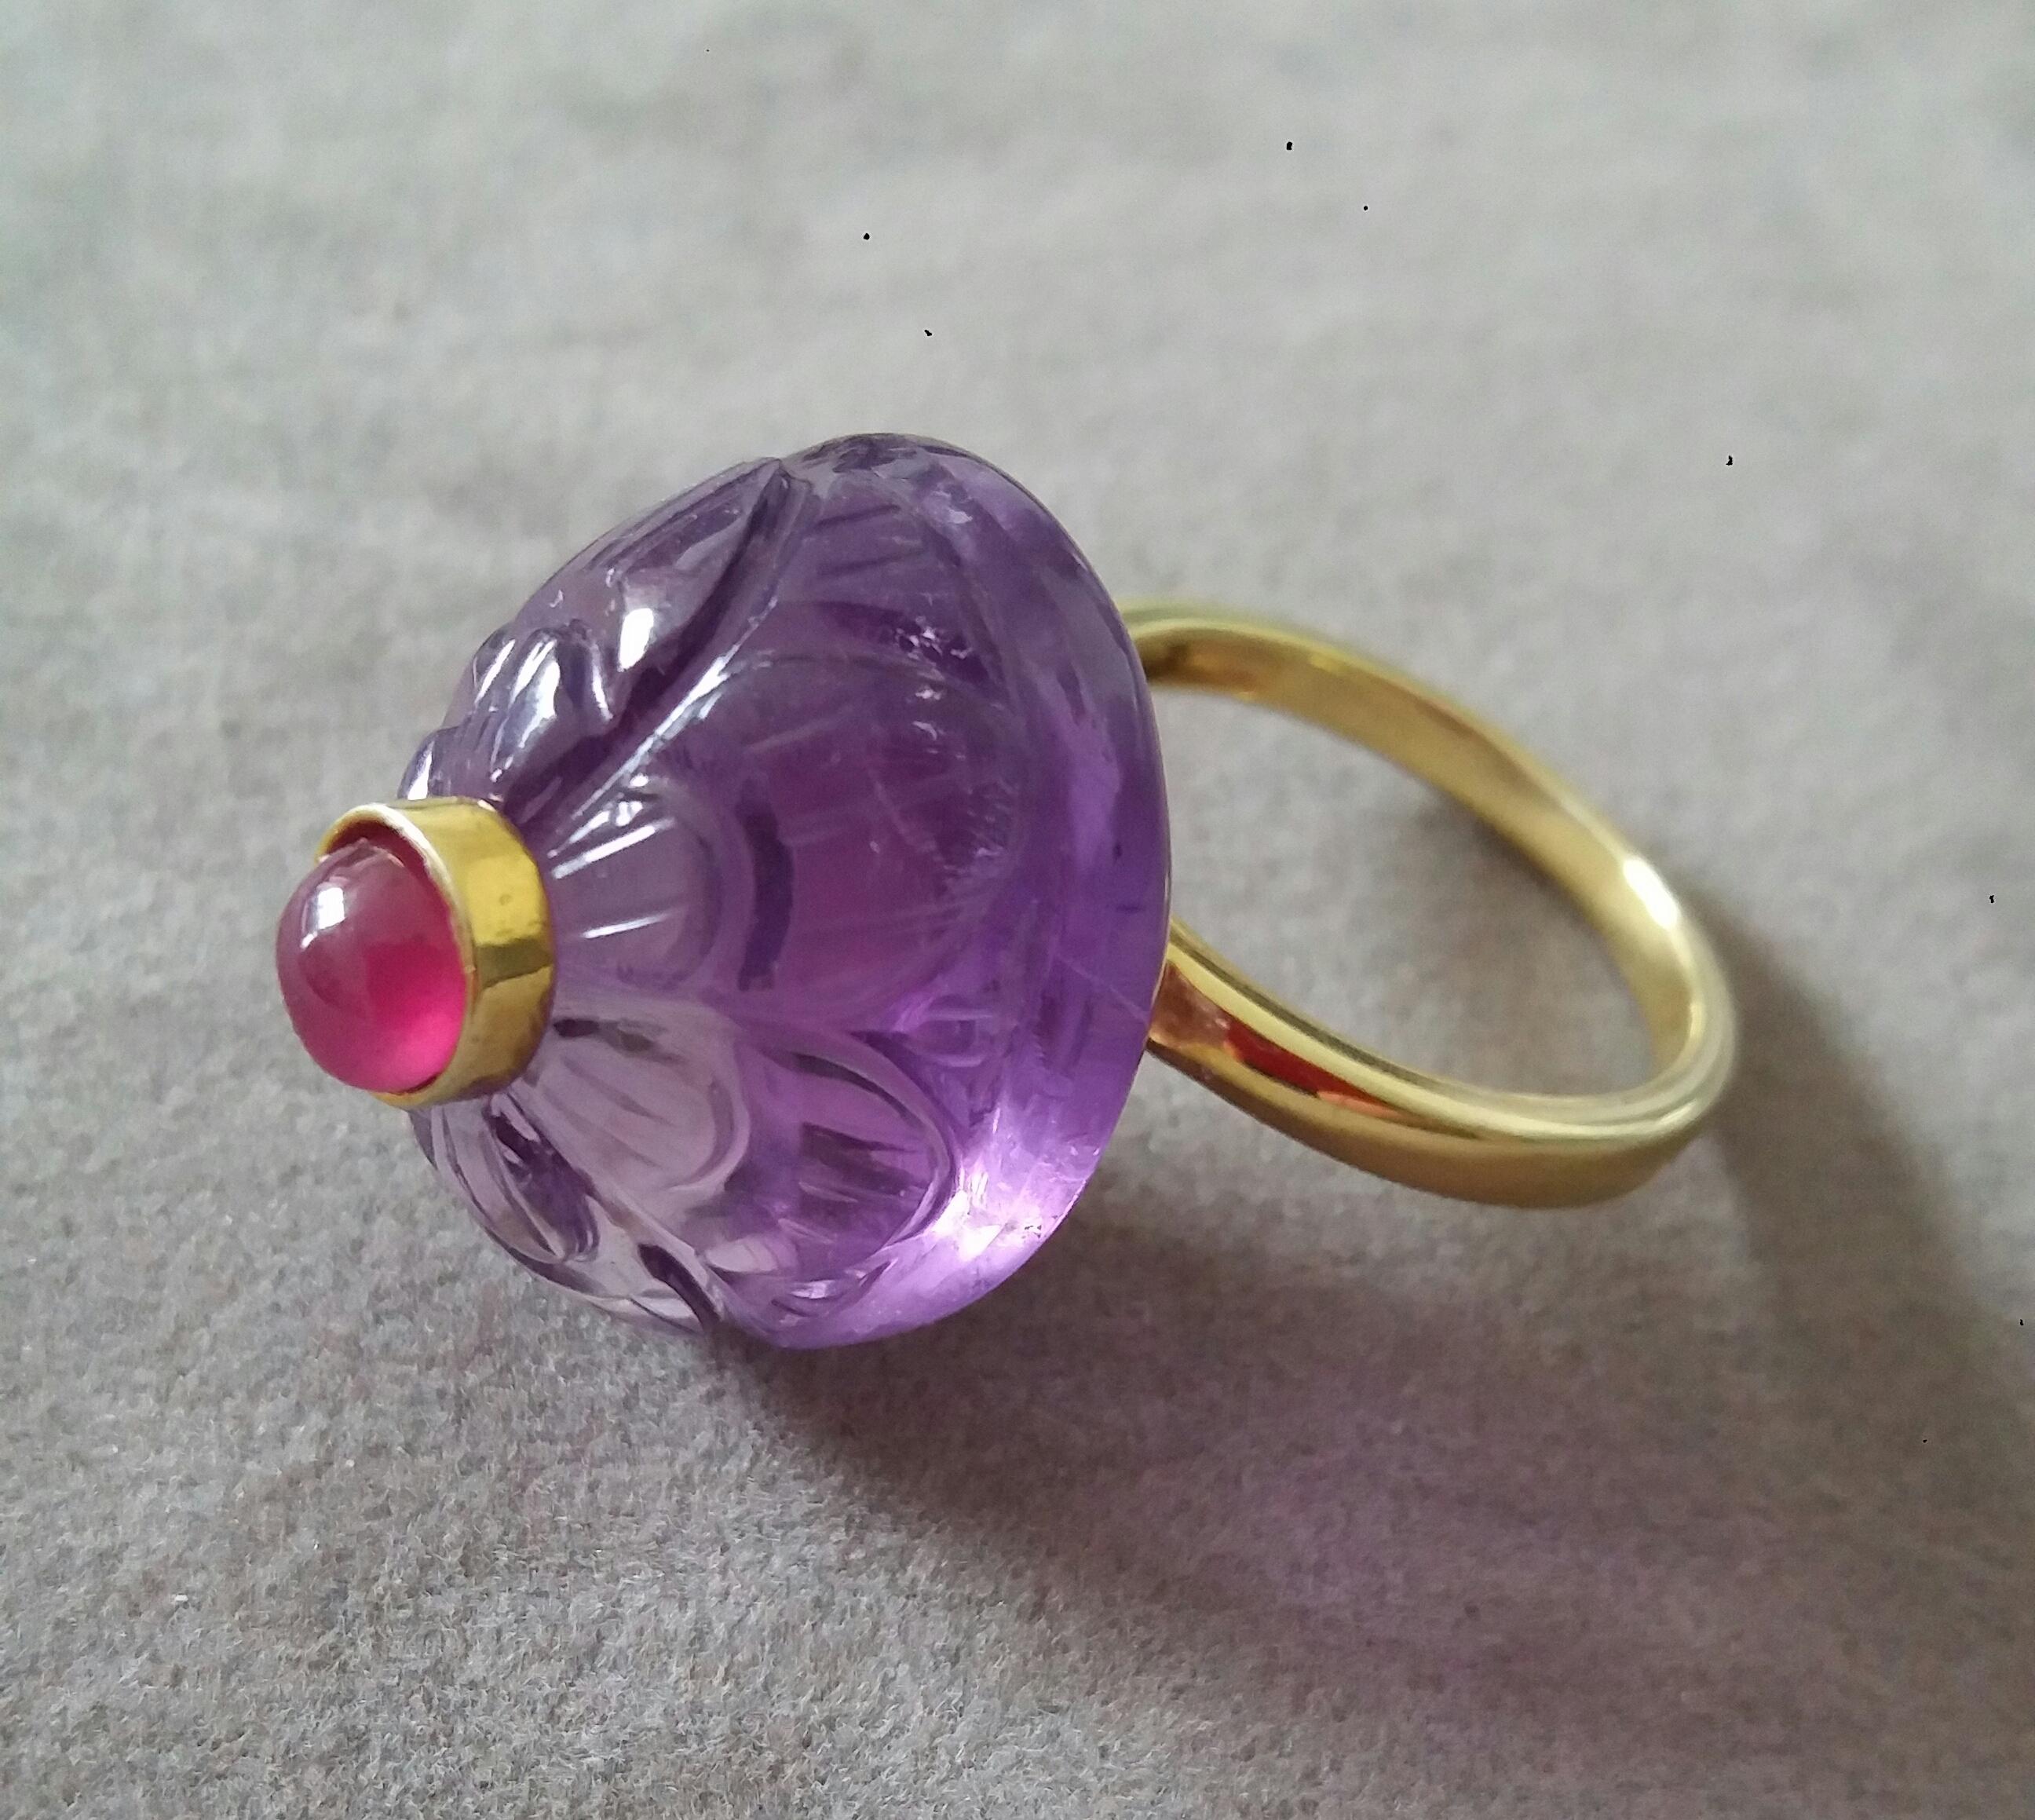 Unique style ring with a Big Natural Engraved Oval Shape Amethyst ,measuring 22 mm. x 18 mm x 14 mm. and weighing 41 Carats with a nice Round Ruby Cab measuring 6 mm in diameter  set in 14 kt yellow gold in the middle...Ring shank is also in 14 kt 